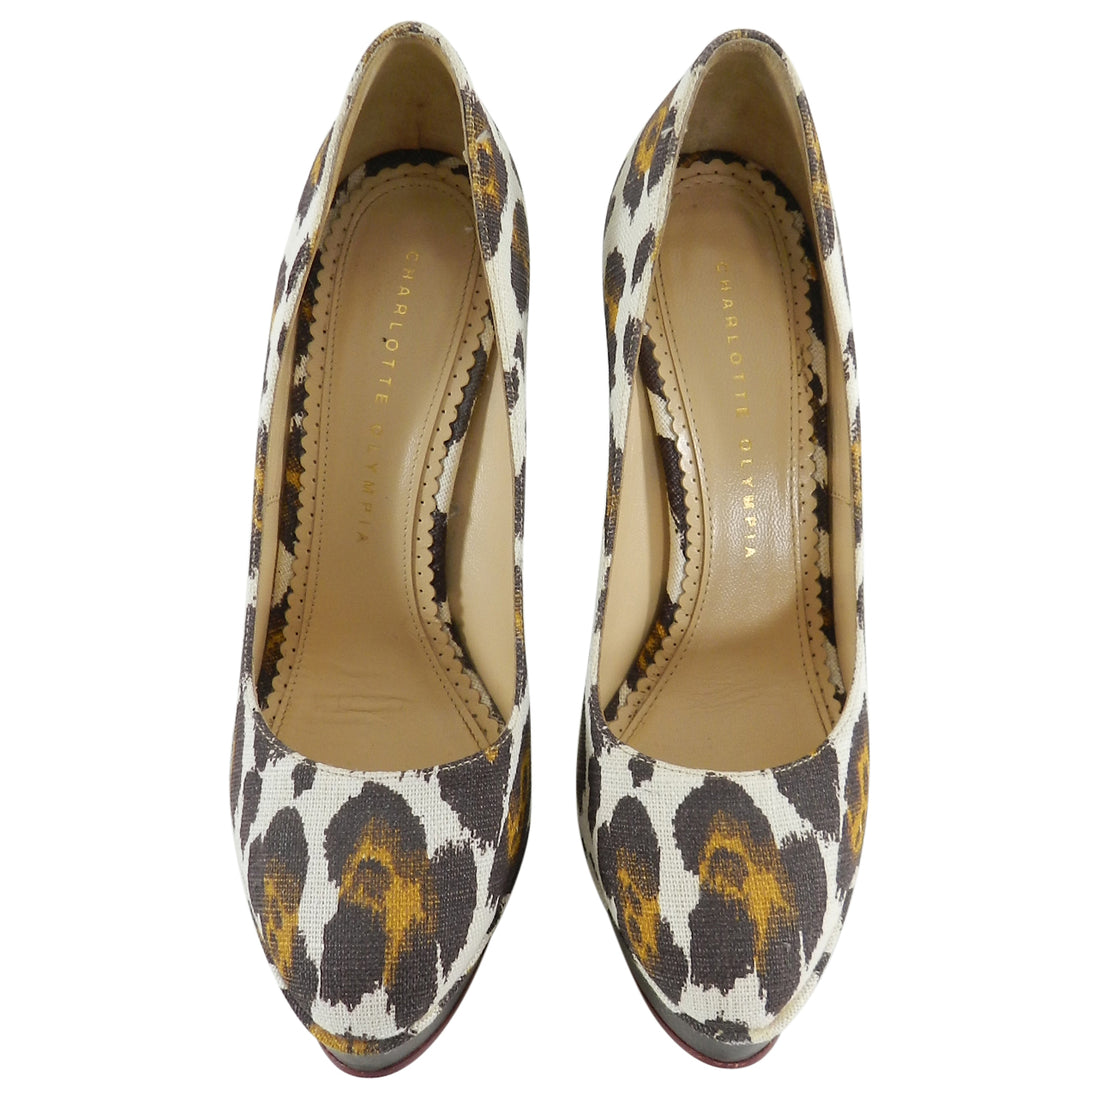 Charlotte Olympia Leopard Canvas and Wood Dolly Platform Heels - 37